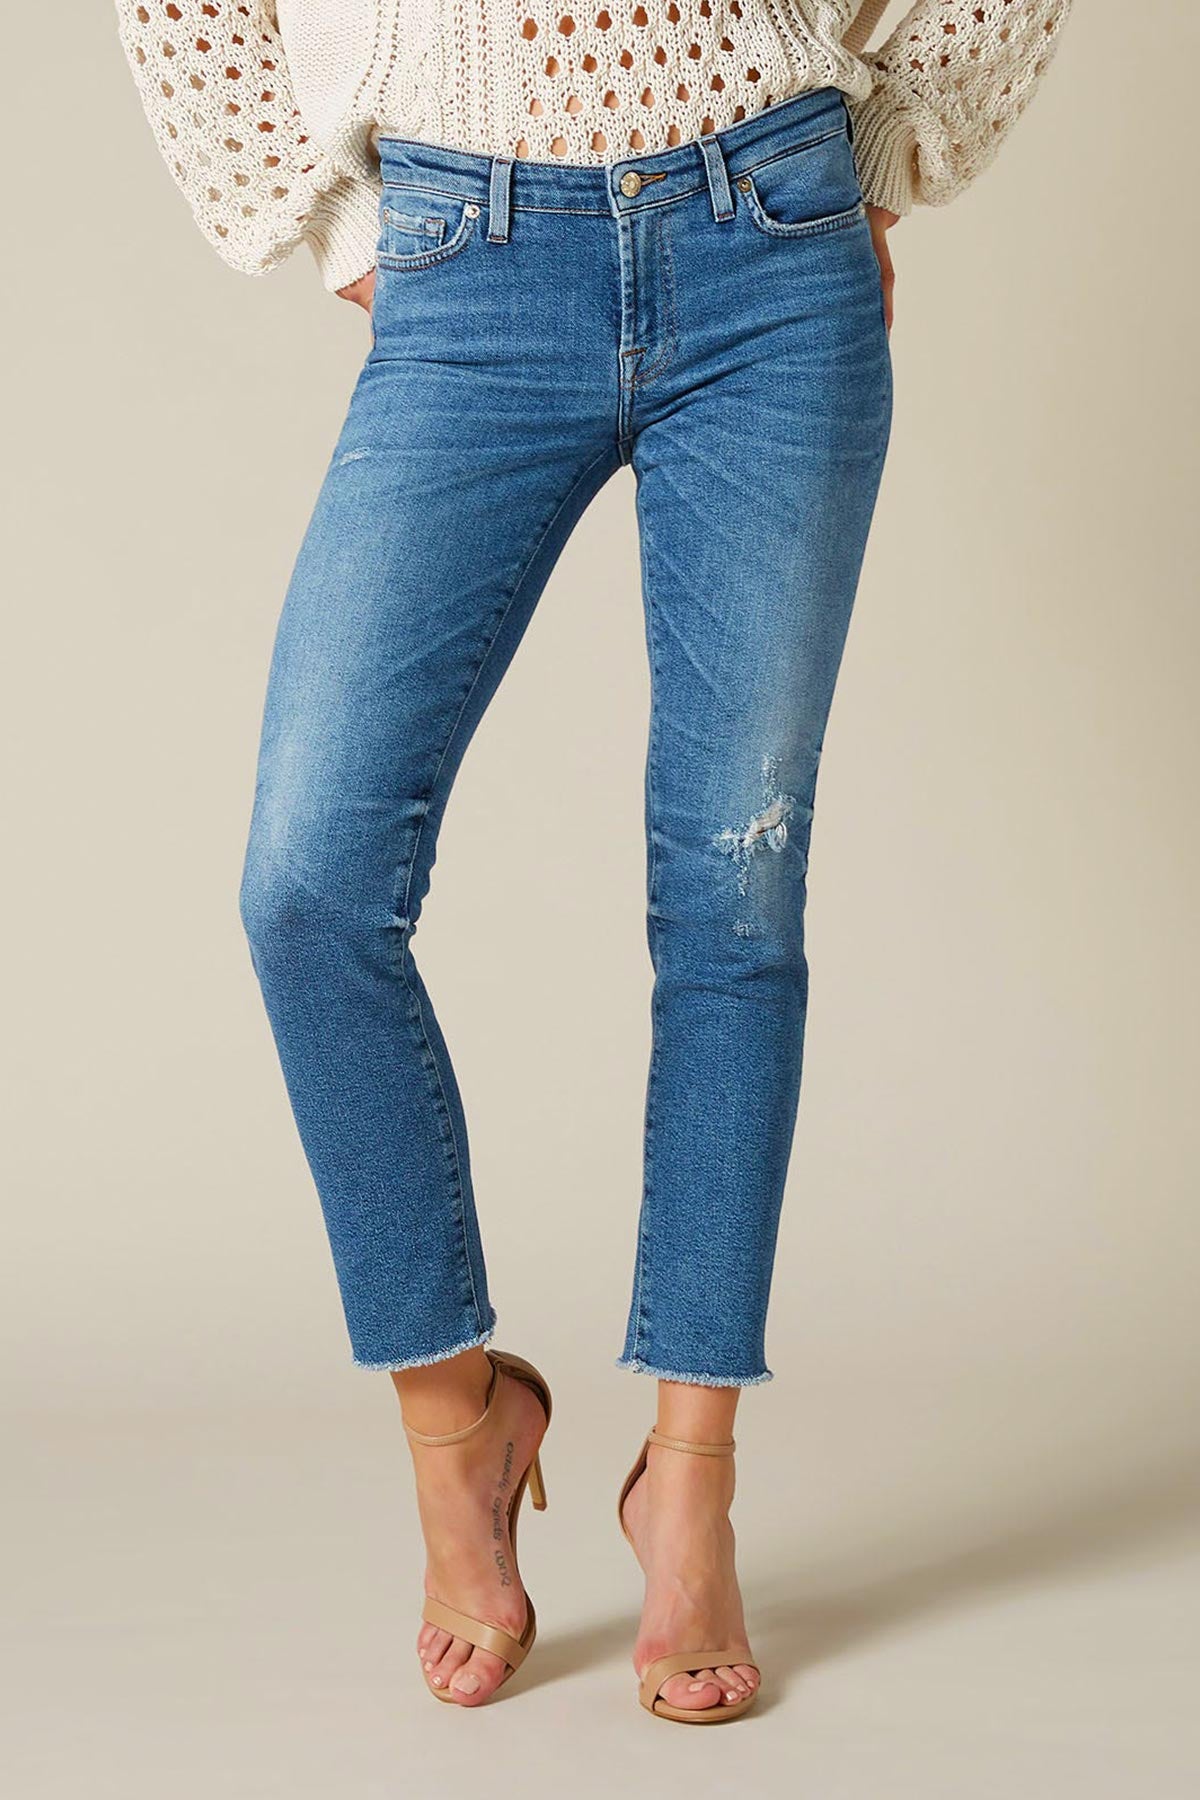 7 For All Mankind Pyper Crop Jeans-Libas Trendy Fashion Store